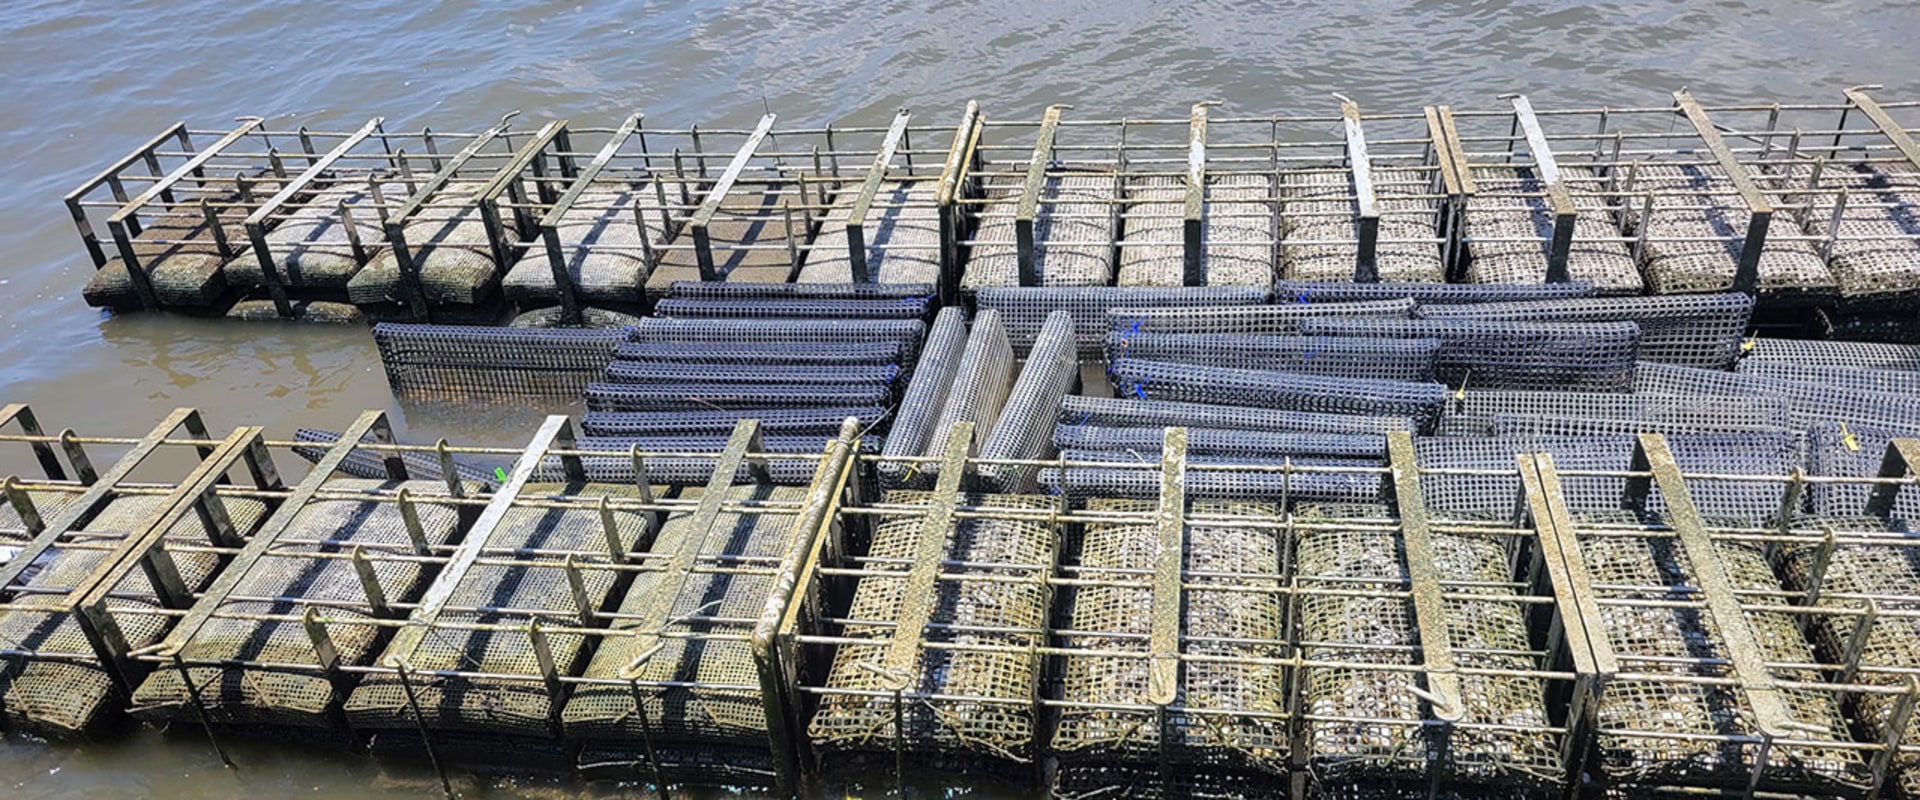 Preserving and Storing Oysters in Fairhope, Alabama: Popular Methods